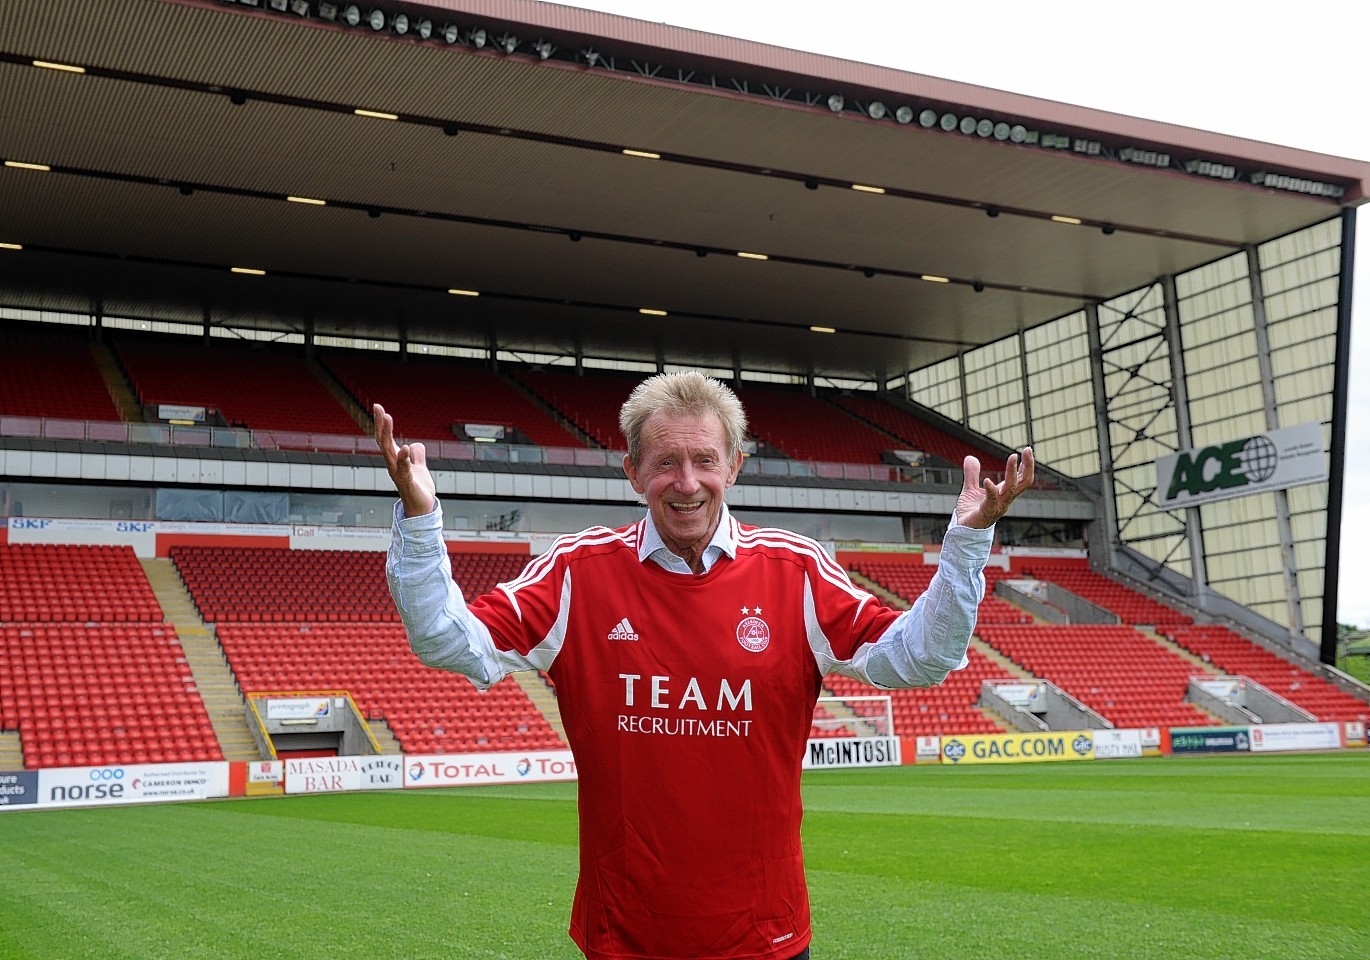 Law  may never have played for the Dons but that doesn't stop the boyhood Aberdeen fan from pulling on a strip